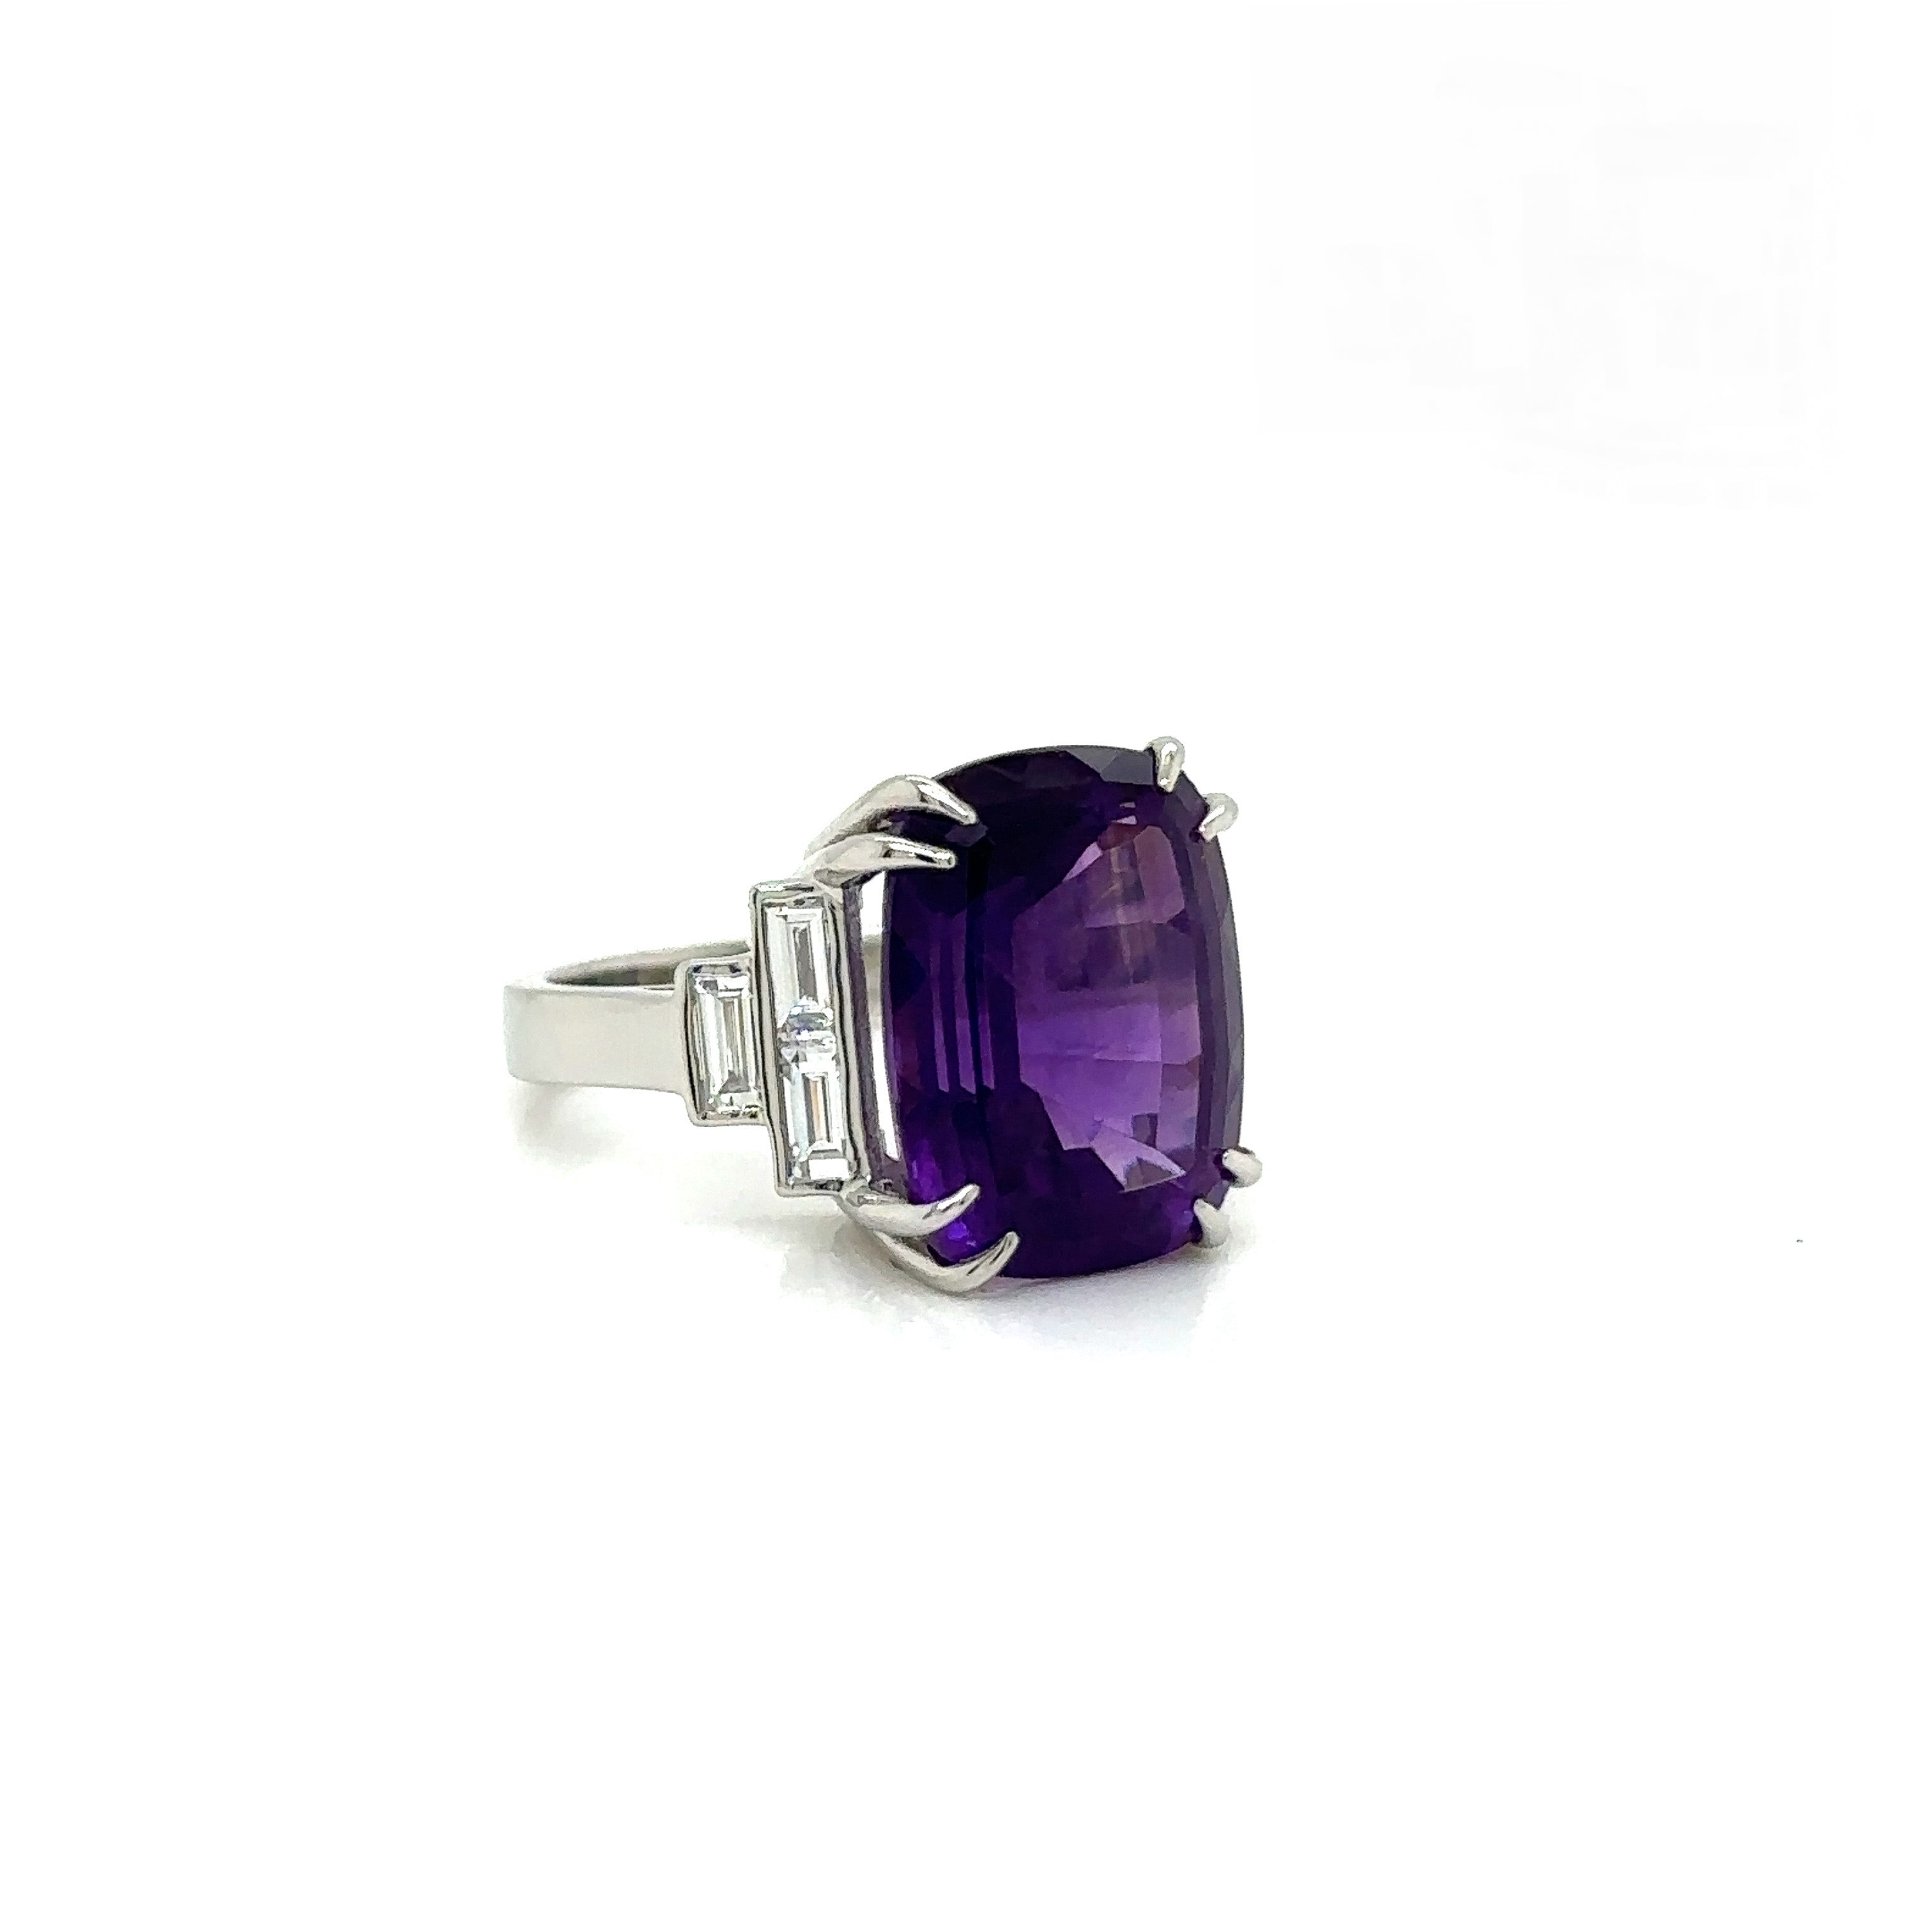 Amethyst and Diamond Ring with Platinum